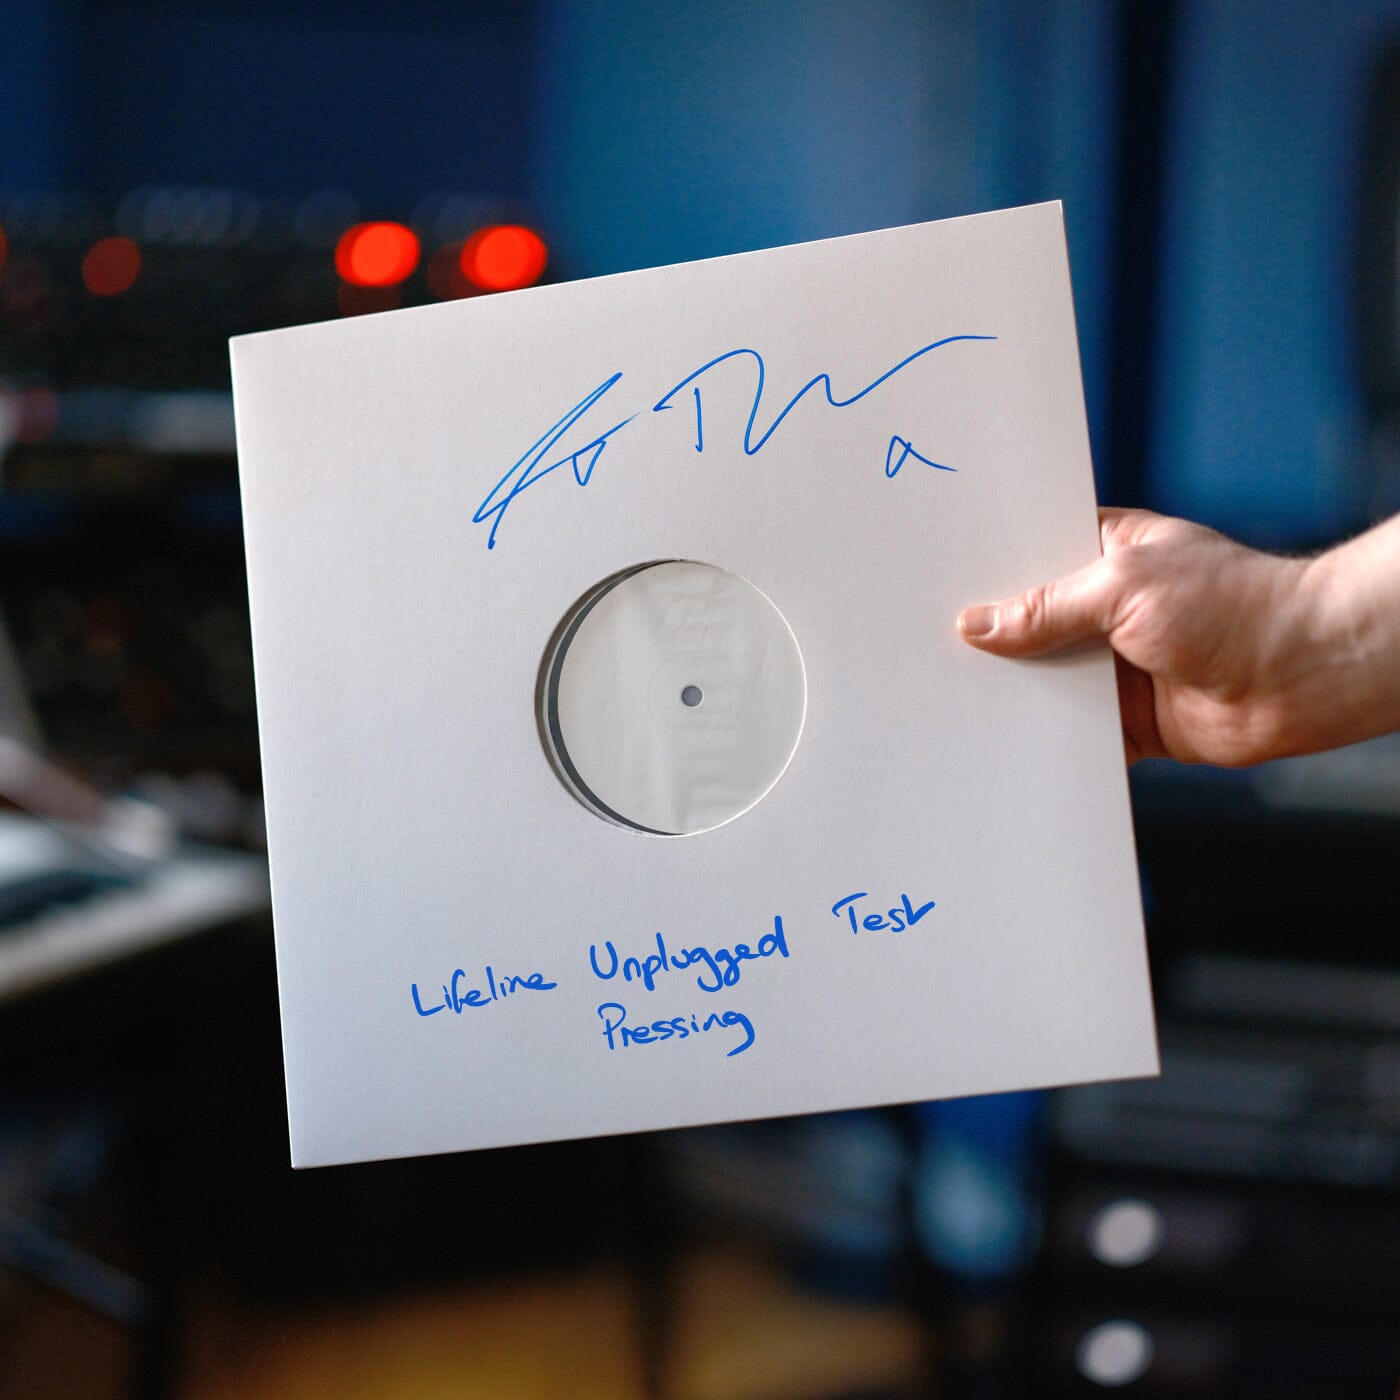 Lifeline (Unplugged) - Signed & Numbered Test Pressing | RJ Thompson | Official Website & Store